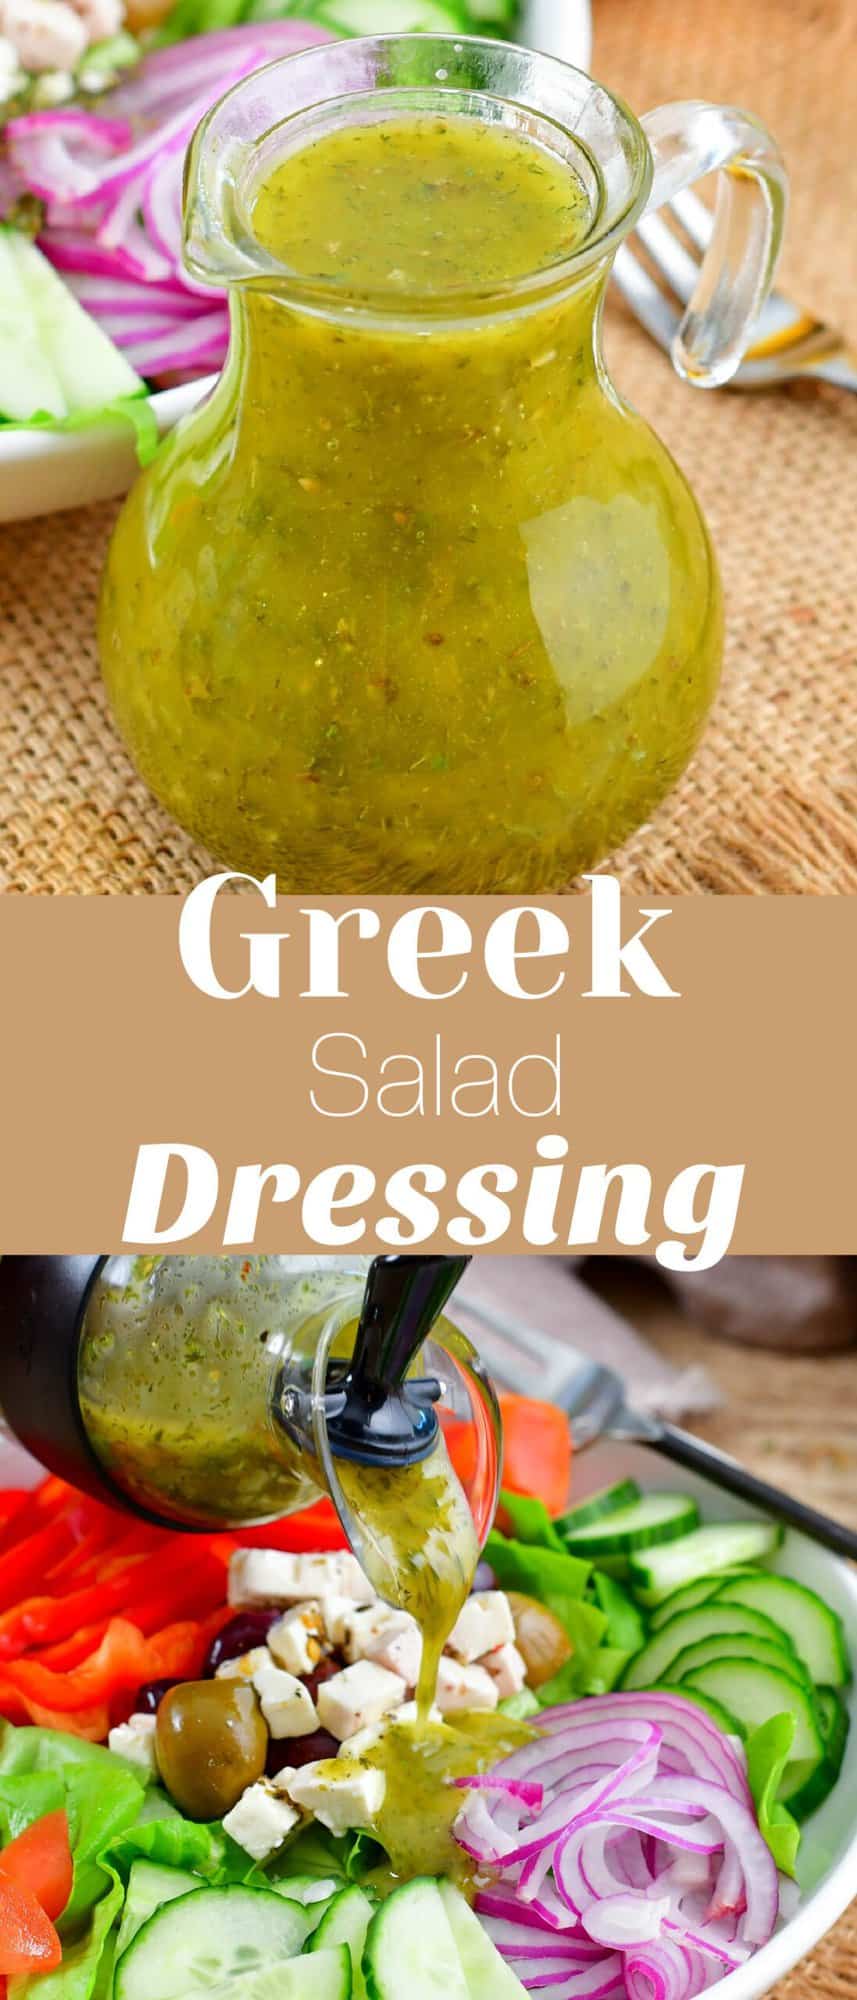 collage of Greek dressing up close and on the salad